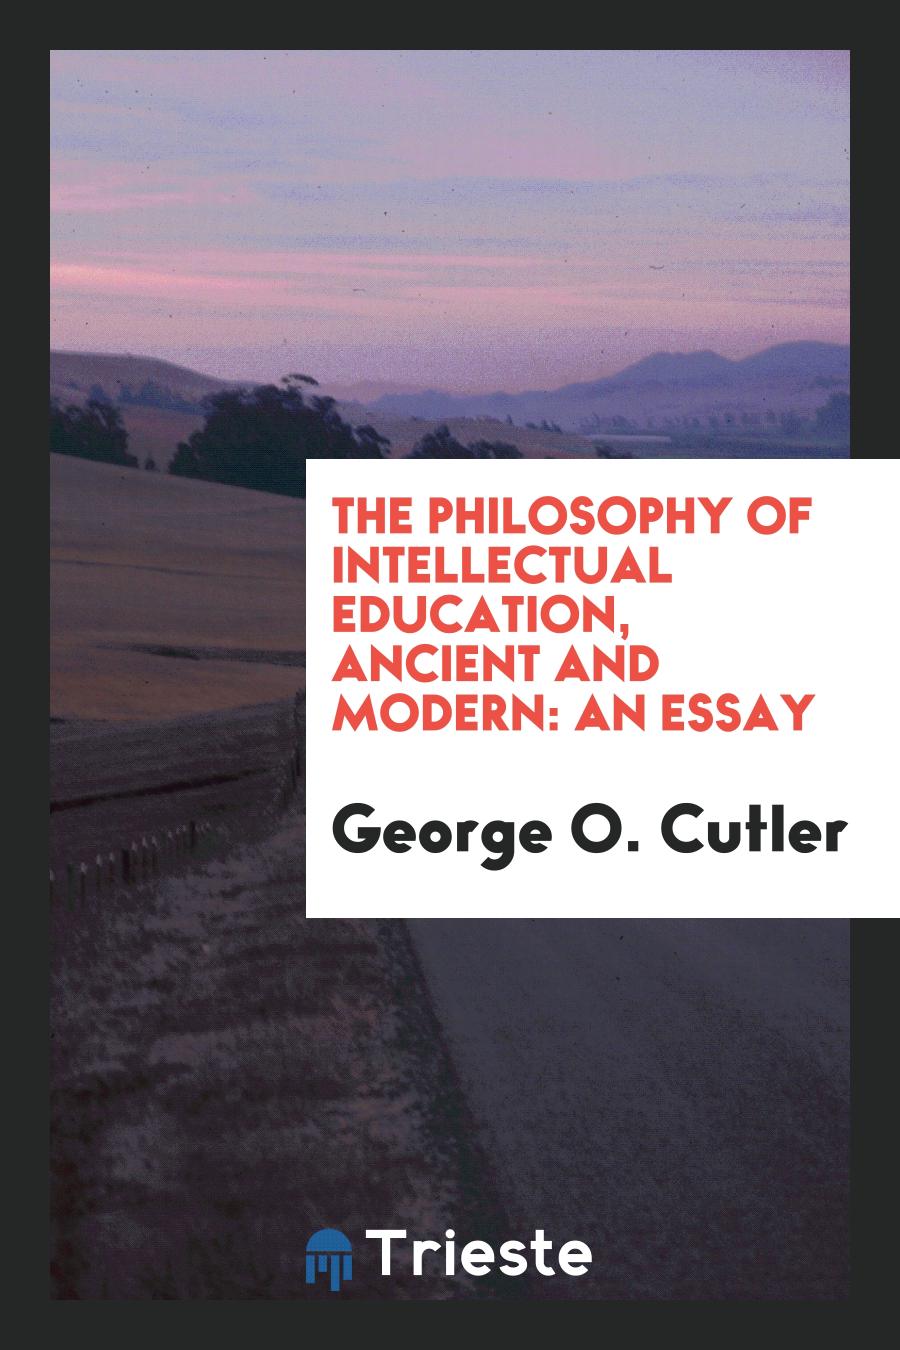 The Philosophy of Intellectual Education, Ancient and Modern: An Essay